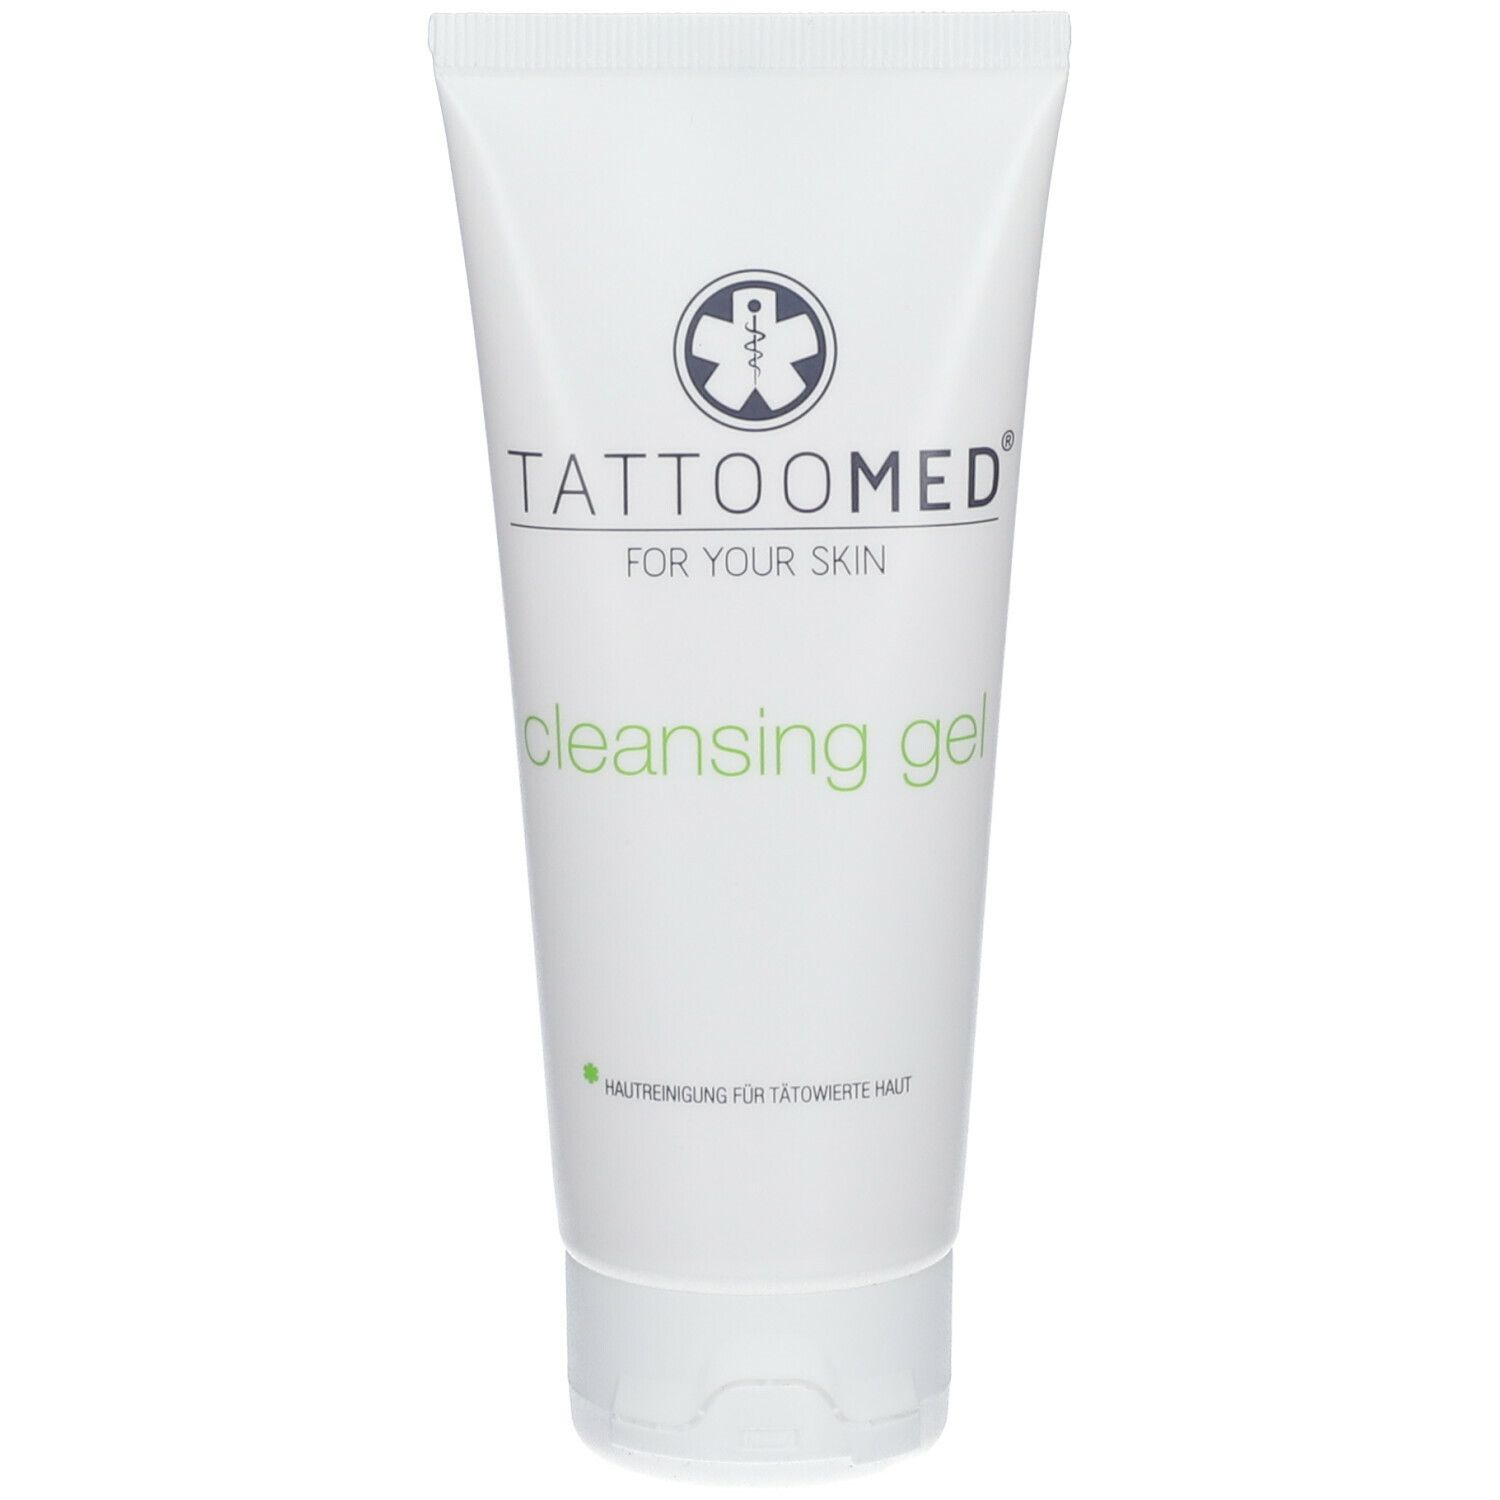 TattooMed® cleansing gel